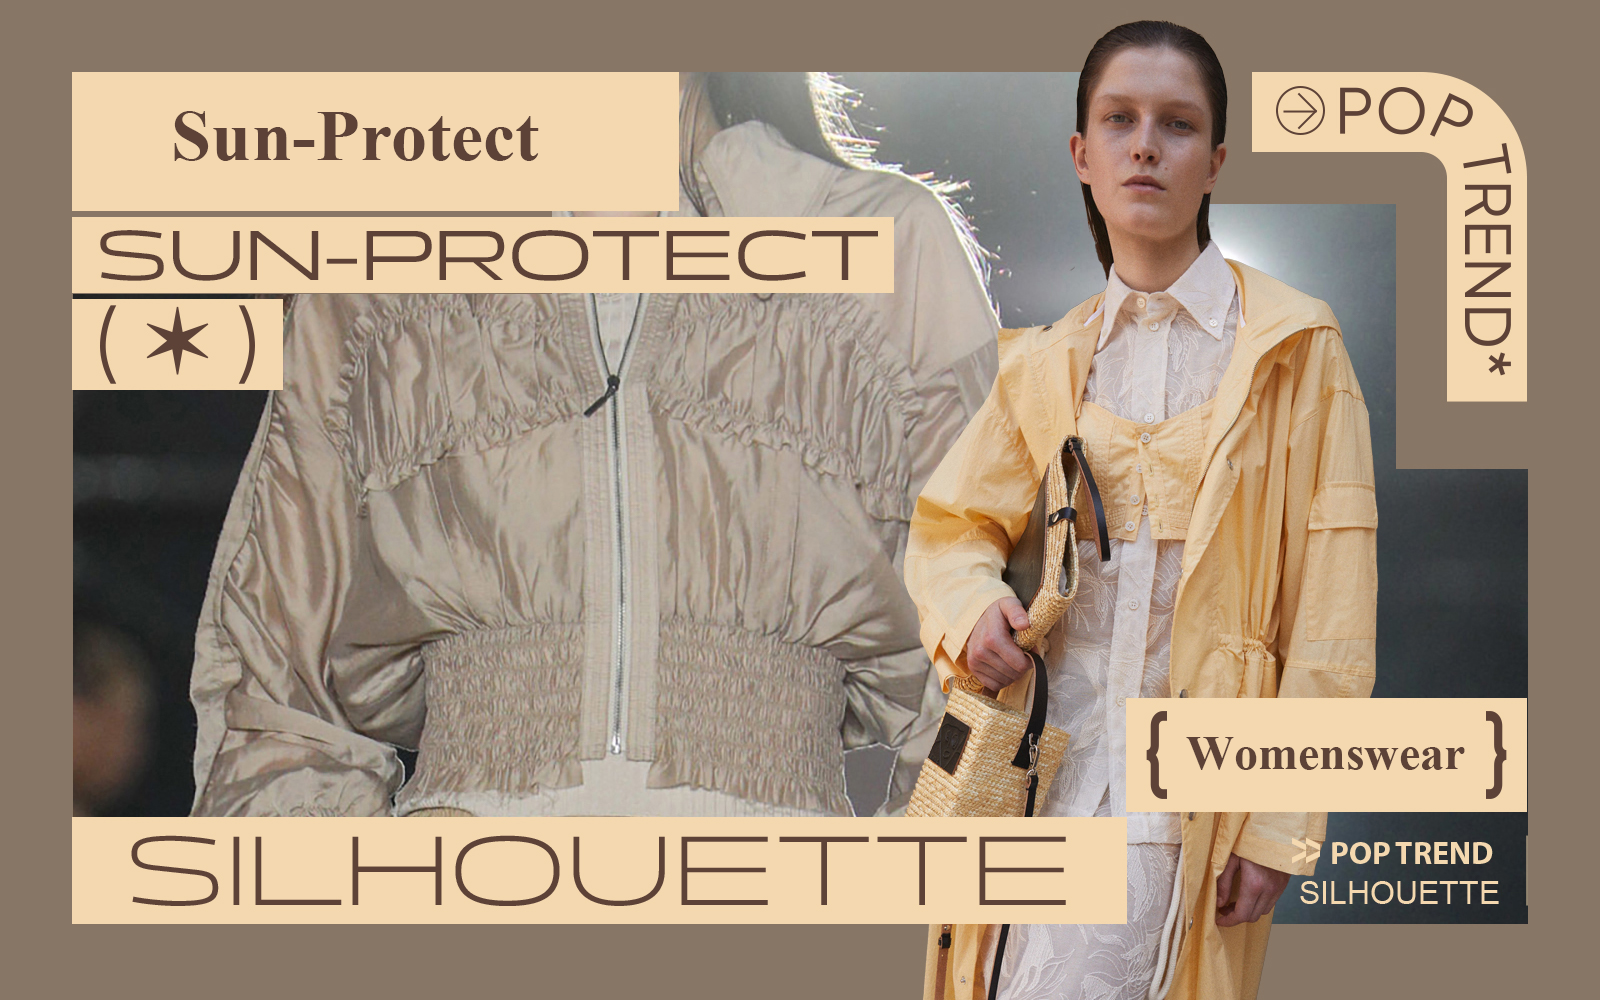 Sunscreen Clothing -- The Silhouette Trend for Women's Outerwear